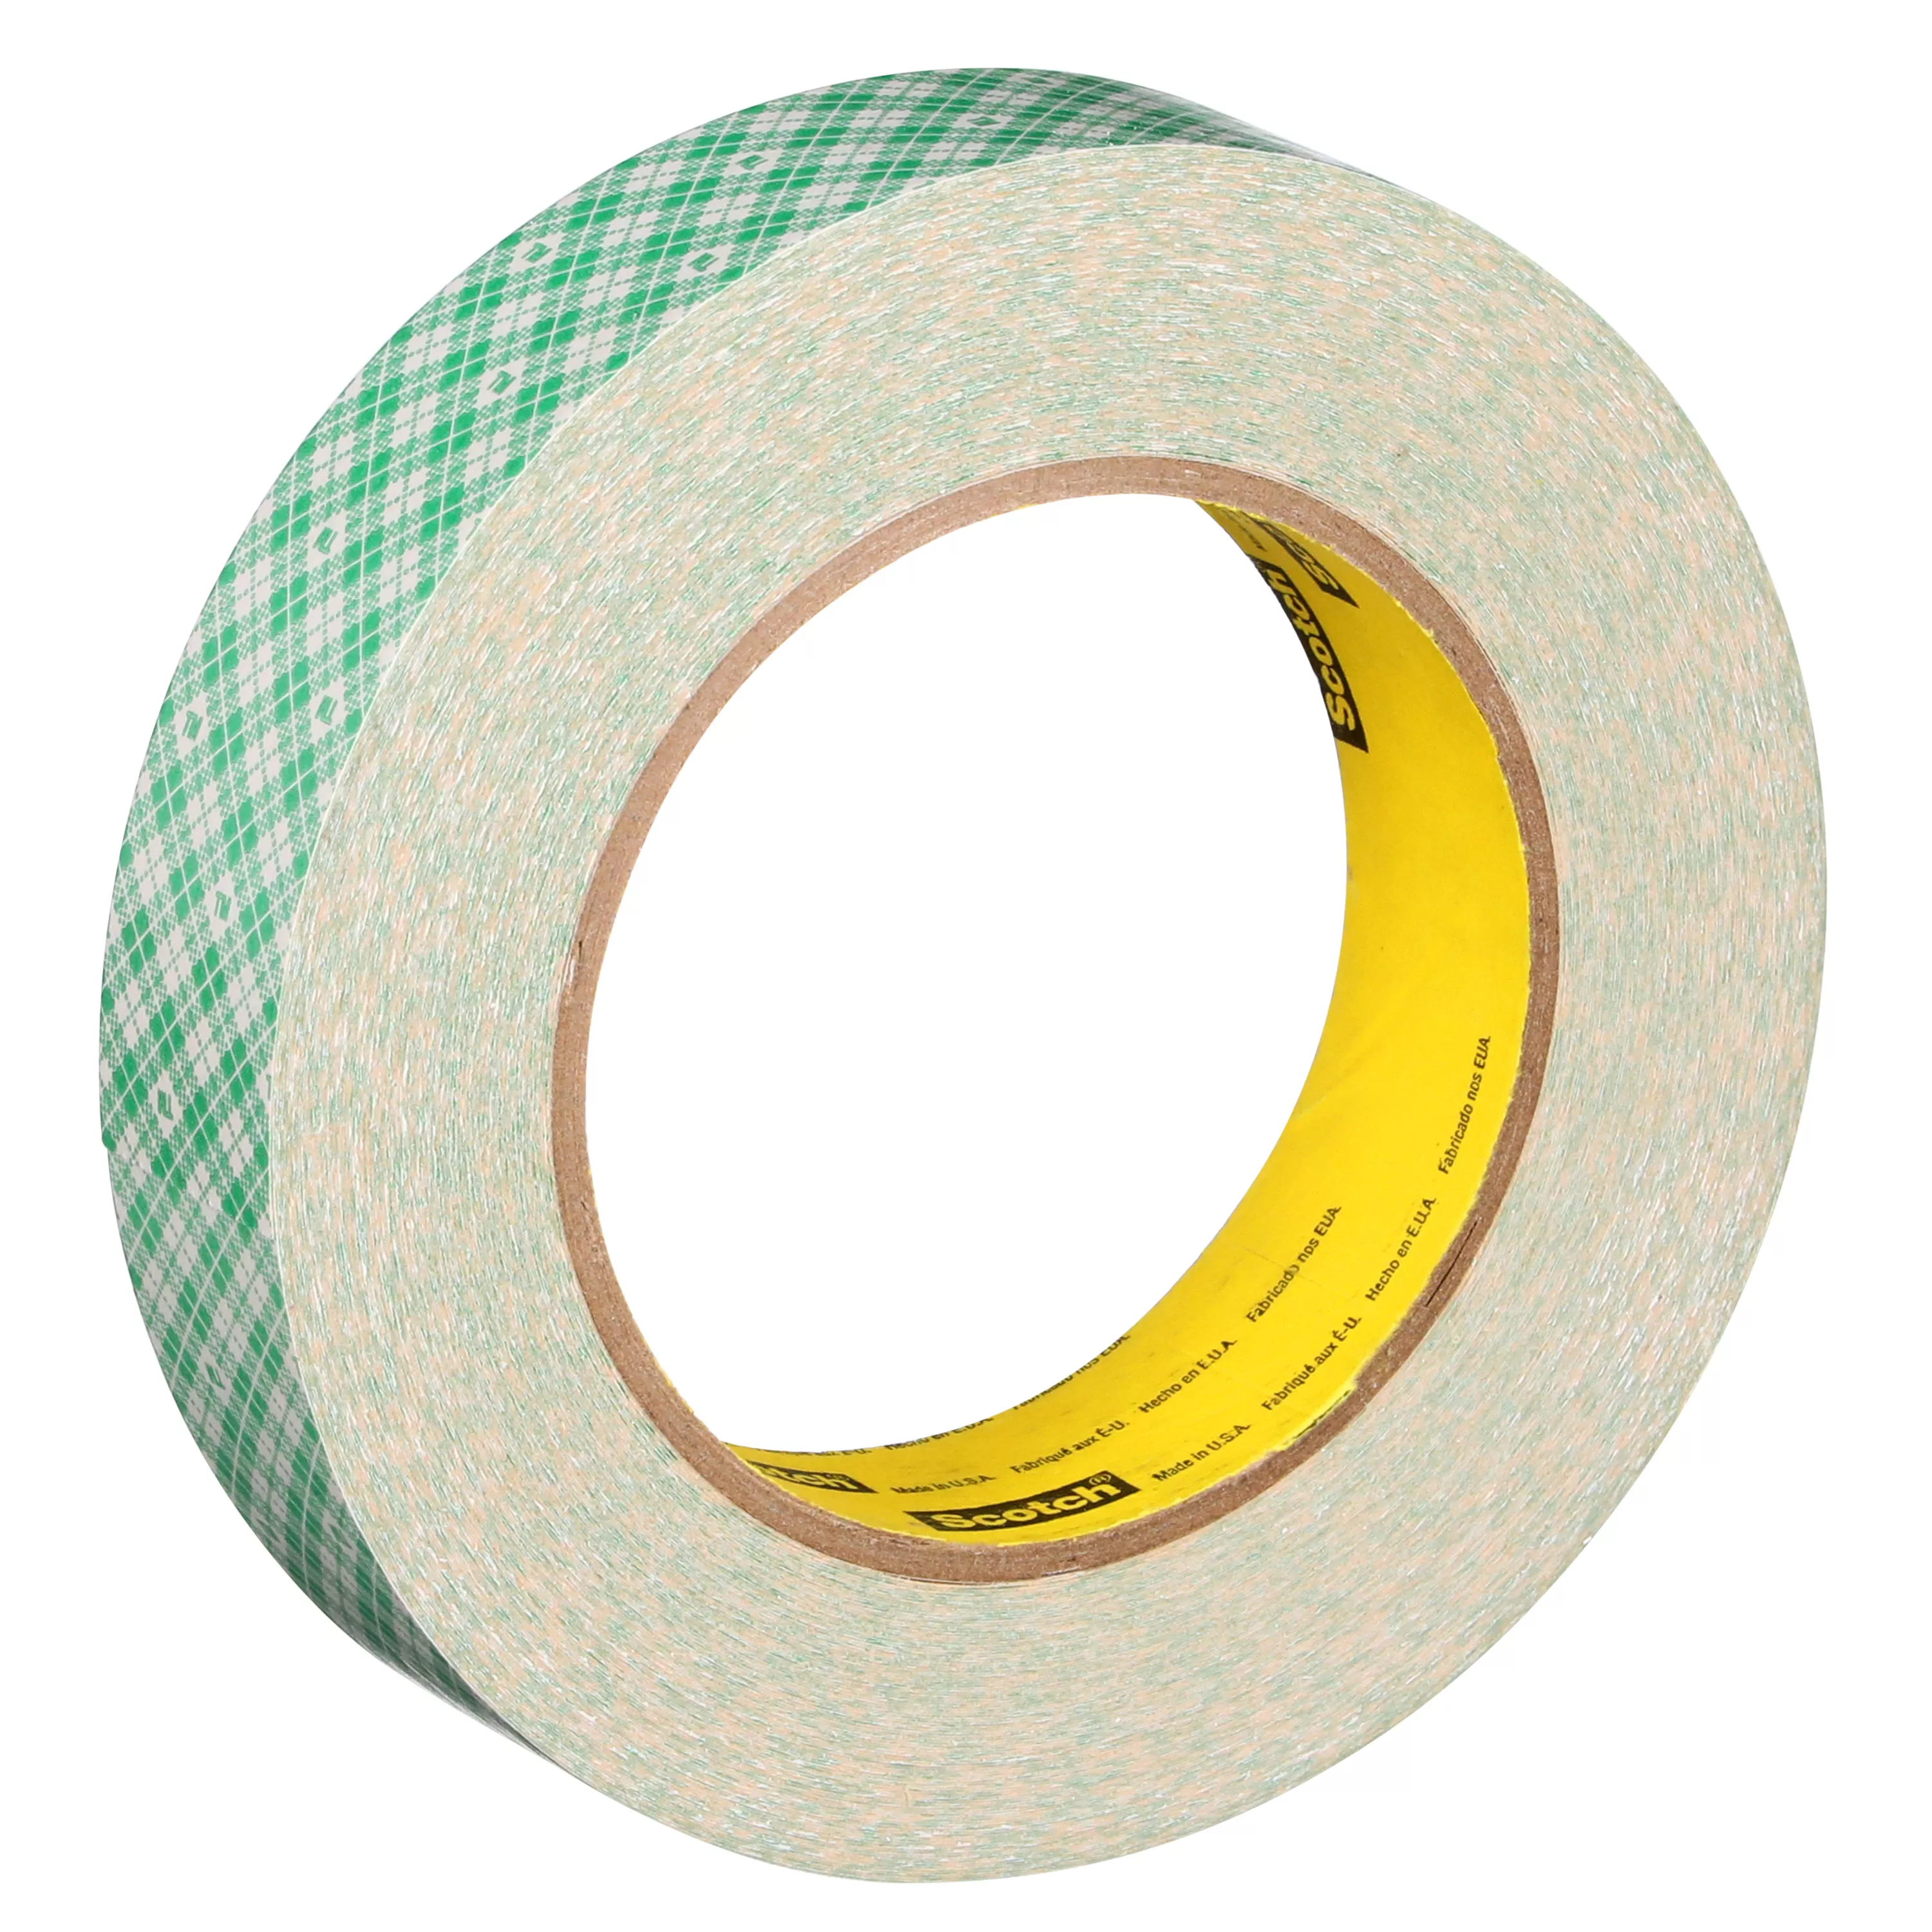 3M™ Double Coated Paper Tape 410M, Natural, 1 1/2 in x 36 yd, 5 mil, 24
Roll/Case